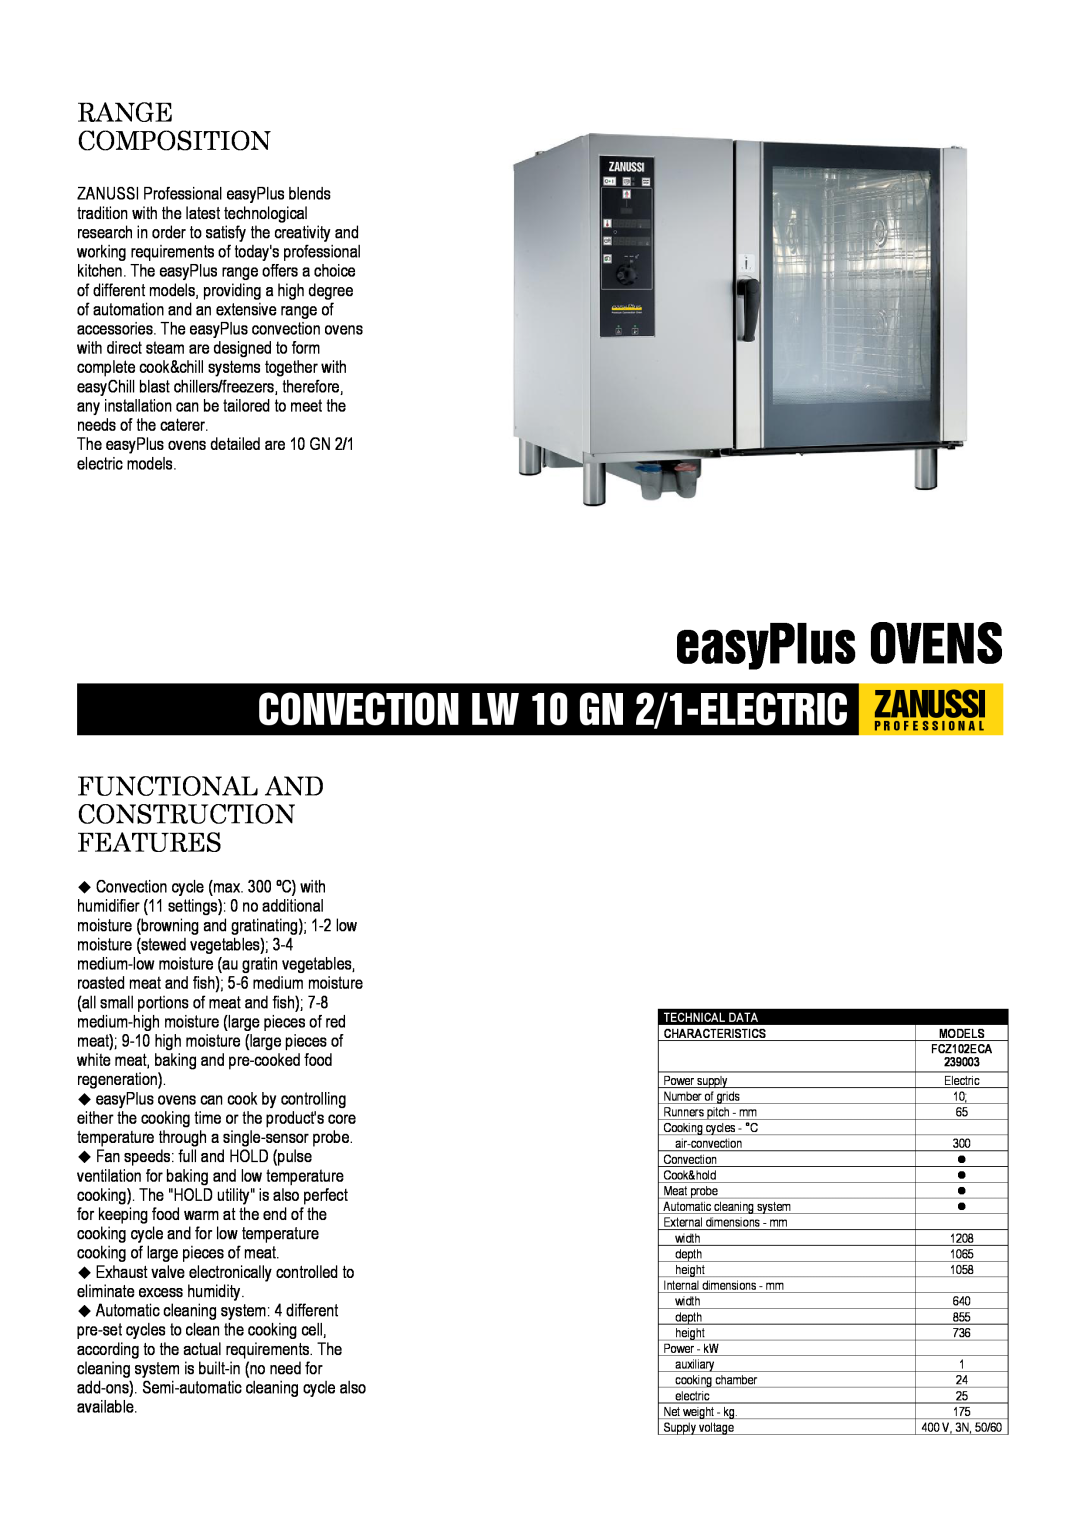 Zanussi 10 GN 2/1, FCZ102ECA, 239003 dimensions easyPlus OVENS, Range Composition, Functional And Construction Features 